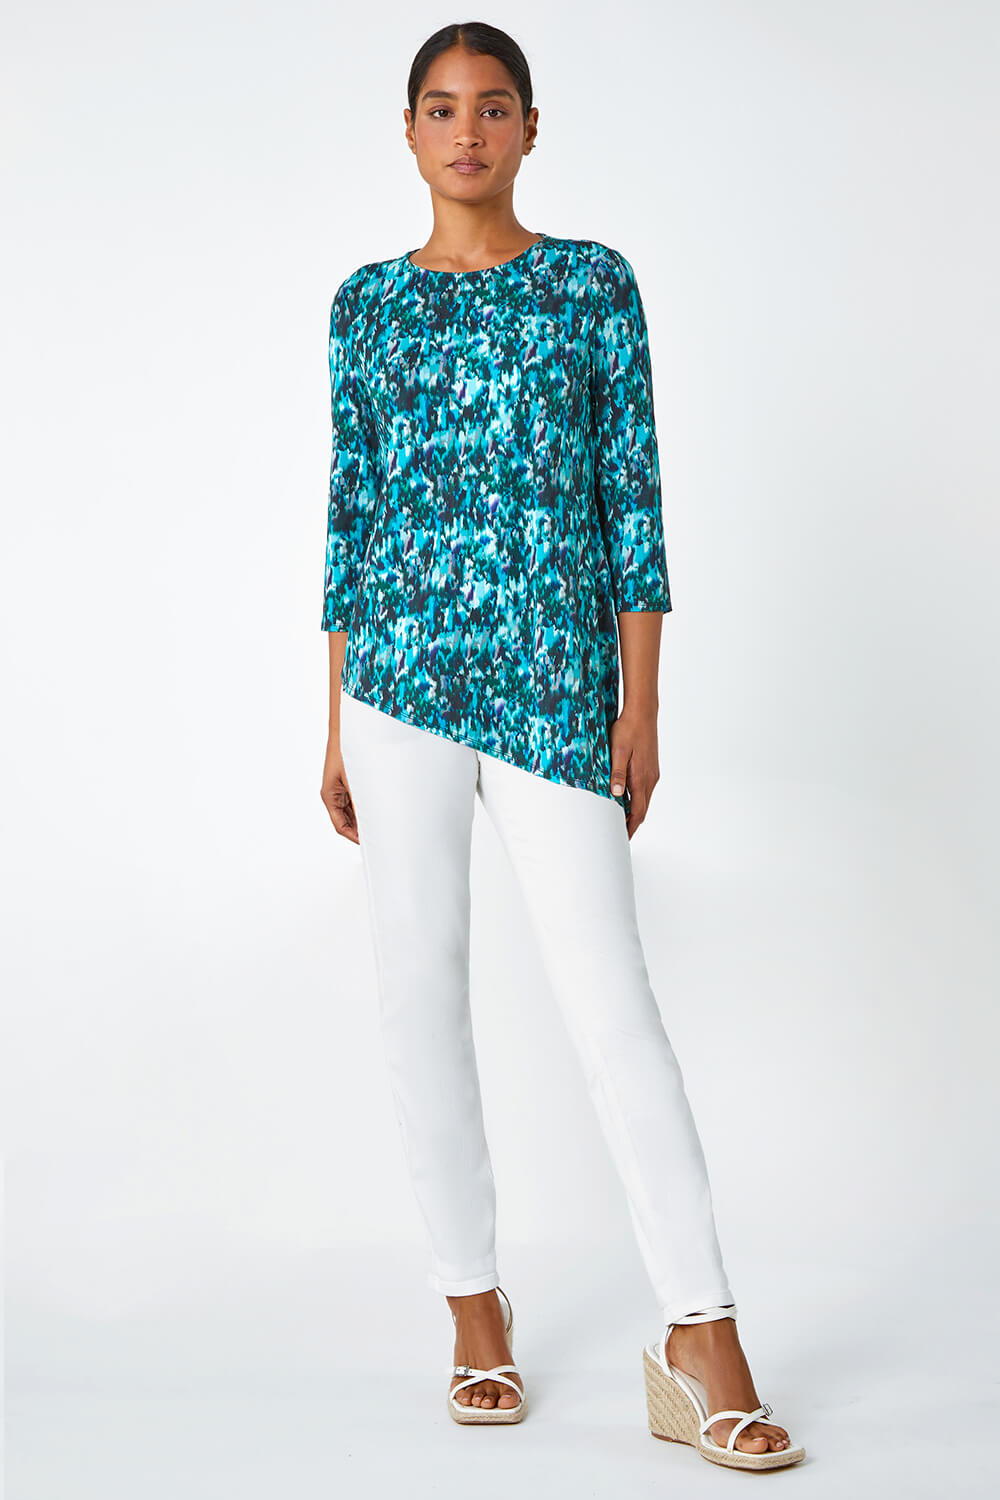 Turquoise Abstract Print Asymmetric Stretch Top, Image 2 of 5